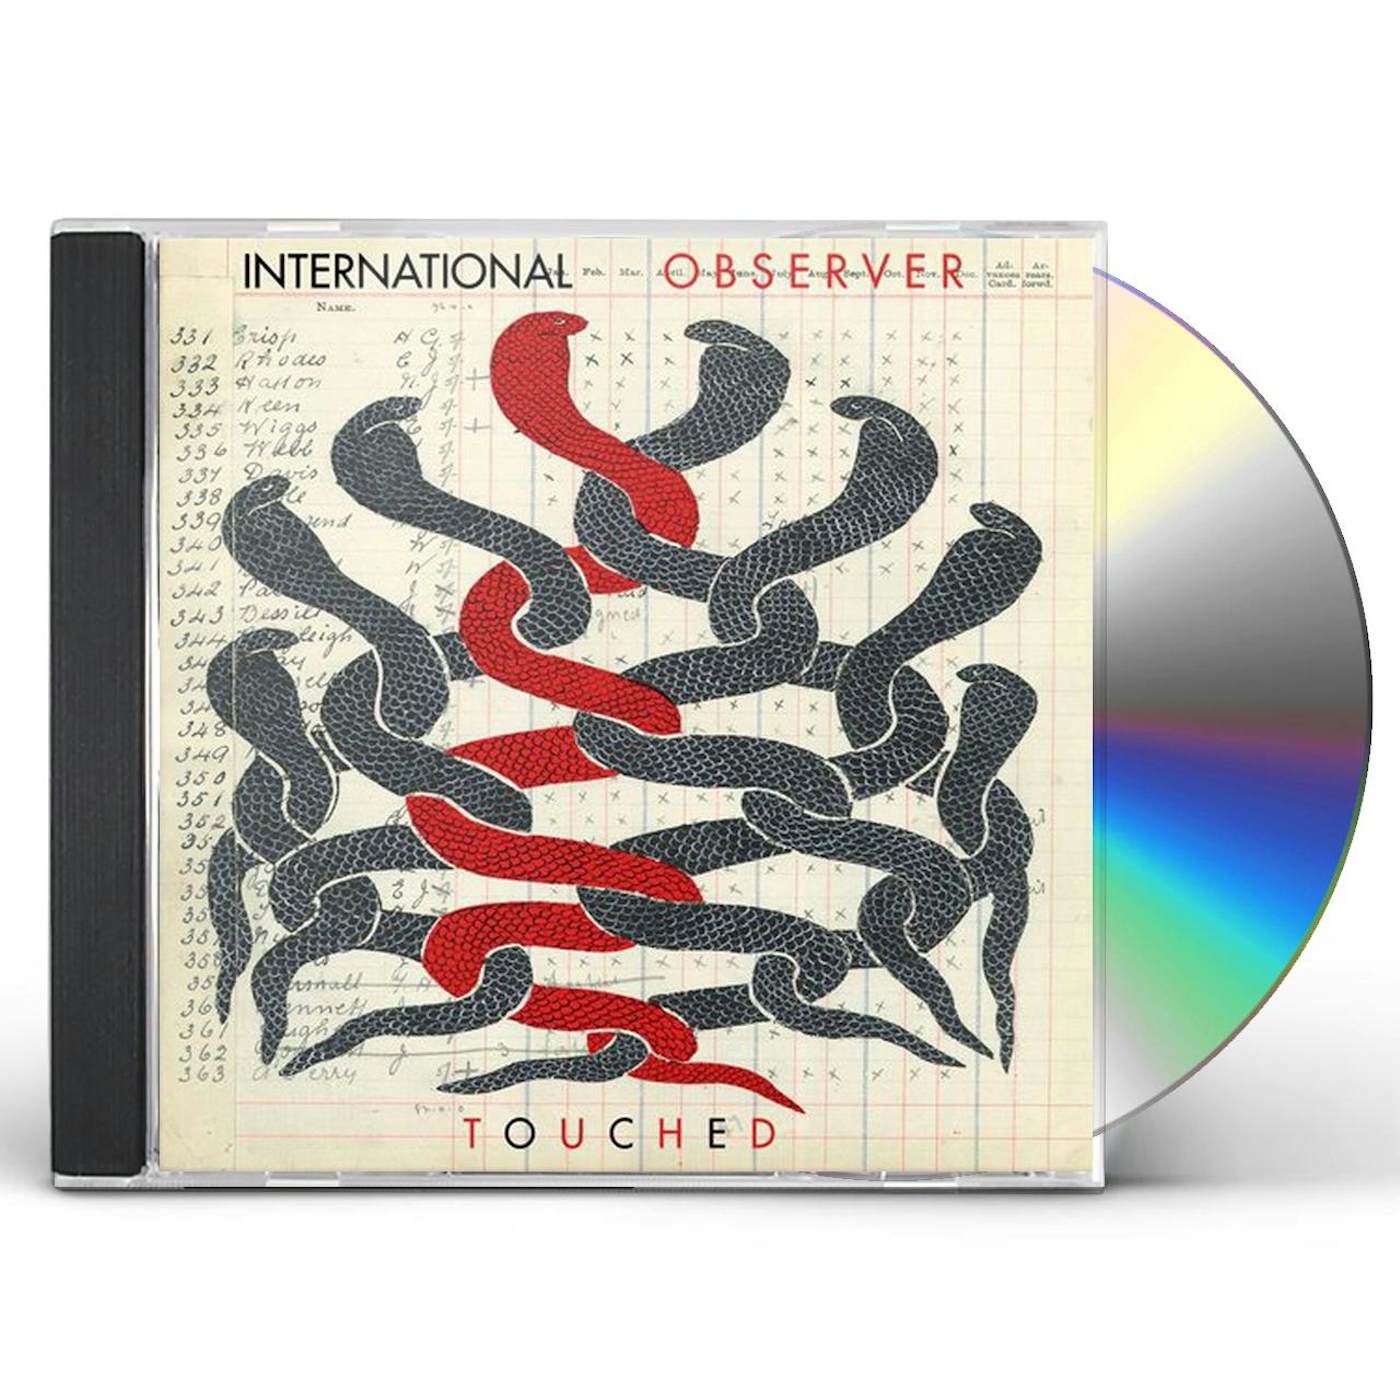 International Observer TOUCHED CD